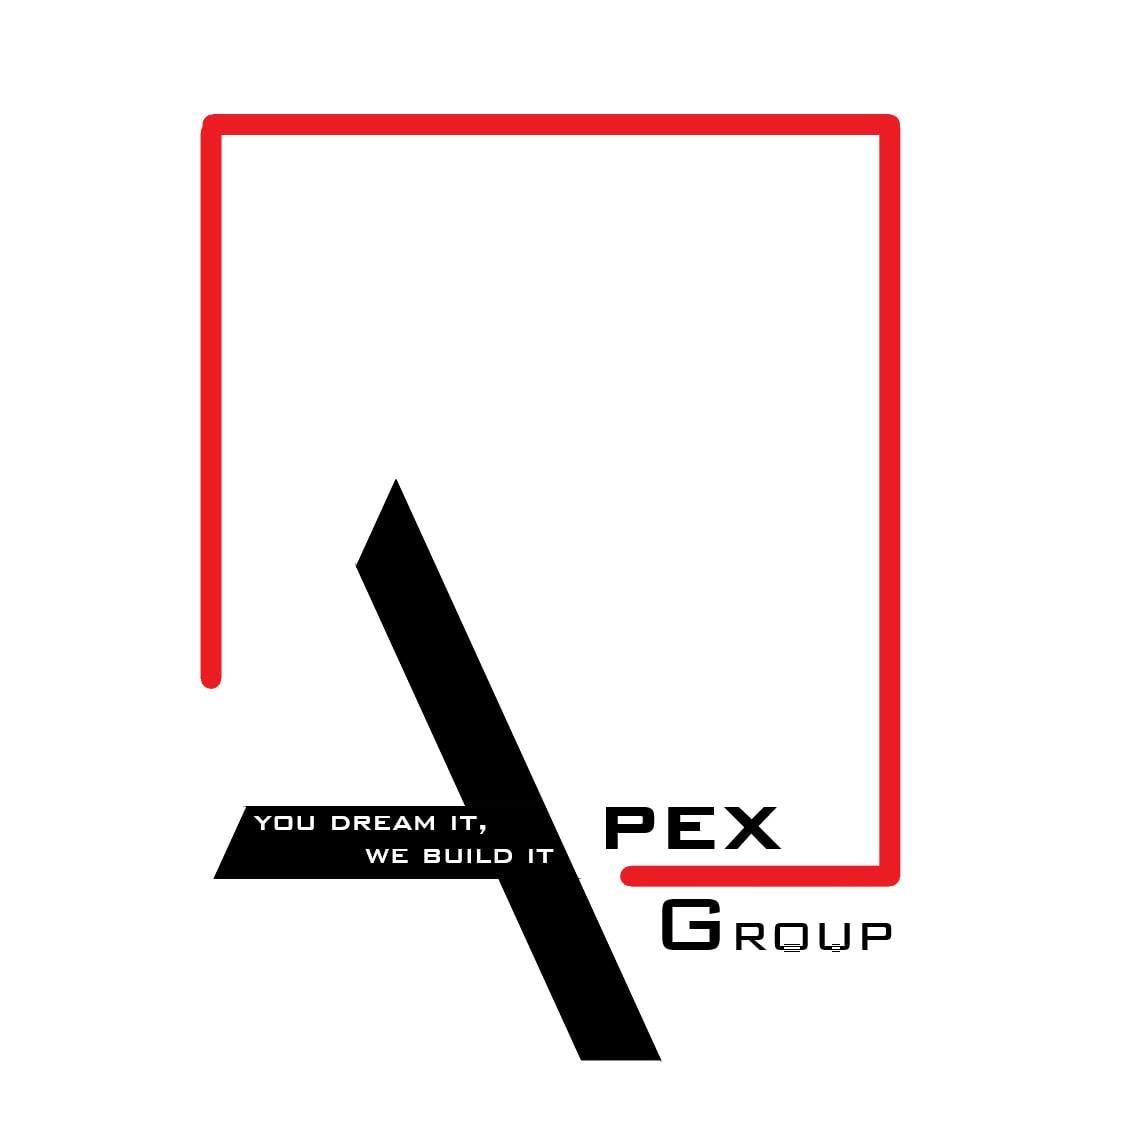 Apex Group|Architect|Professional Services